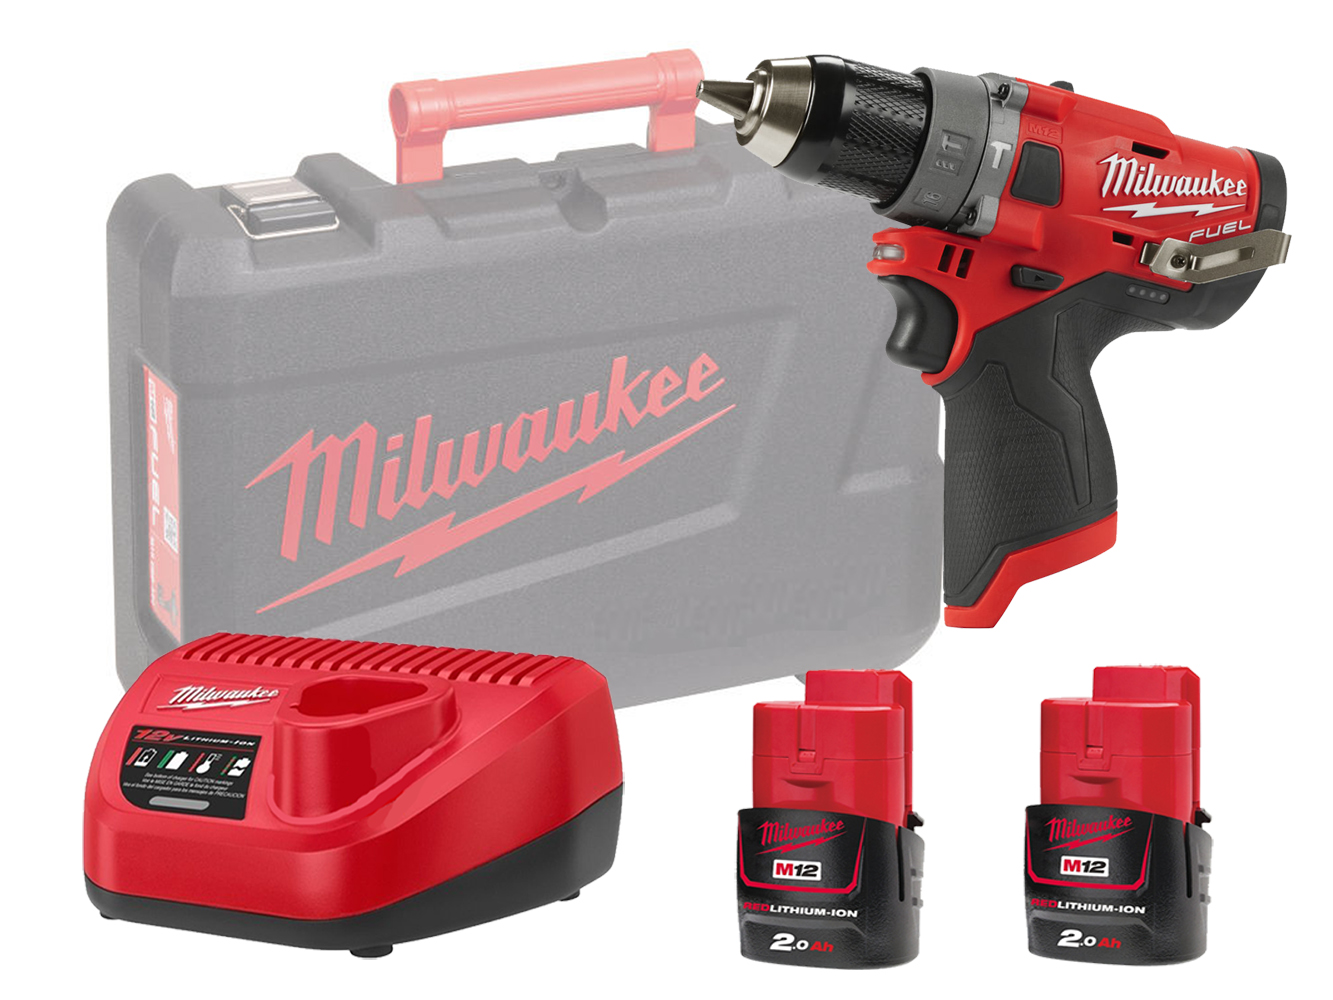 Milwaukee M12FPD 12V Fuel Sub Compact Percussion Drill (Combi Drill) 2-Speed - 2.0Ah Pack